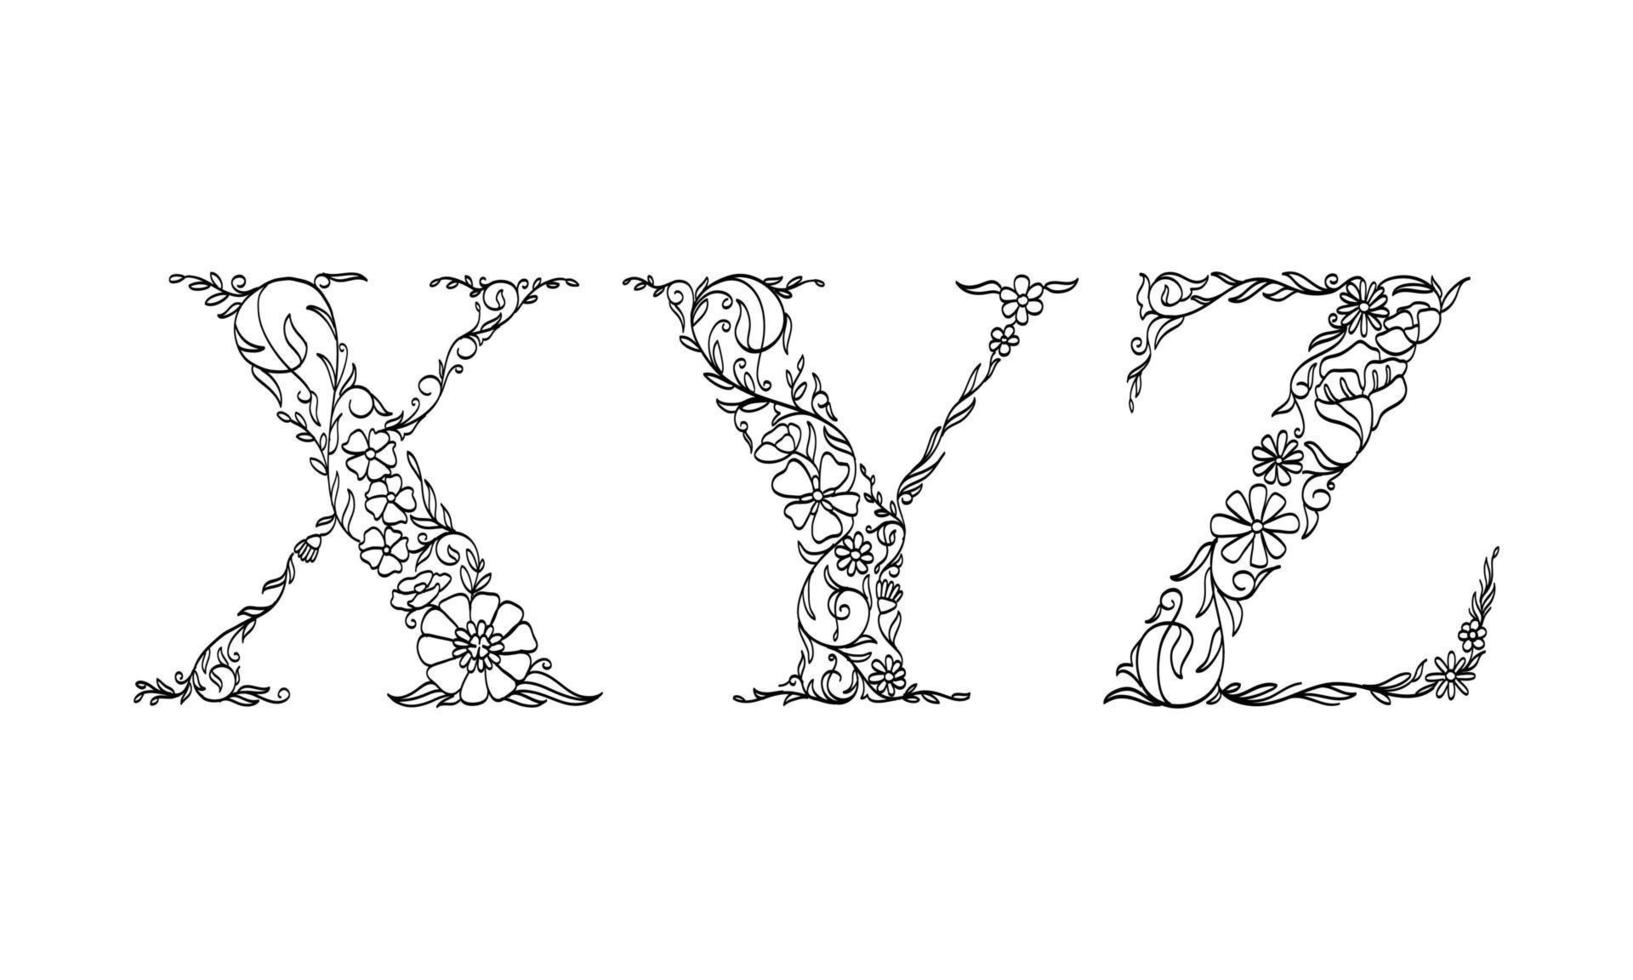 floral illustration alphabet x, y, z, vector graphic font made by flower and leaf plant creative hand drawn line art for abstract and natural nature style looks in unique monochrome design decoration